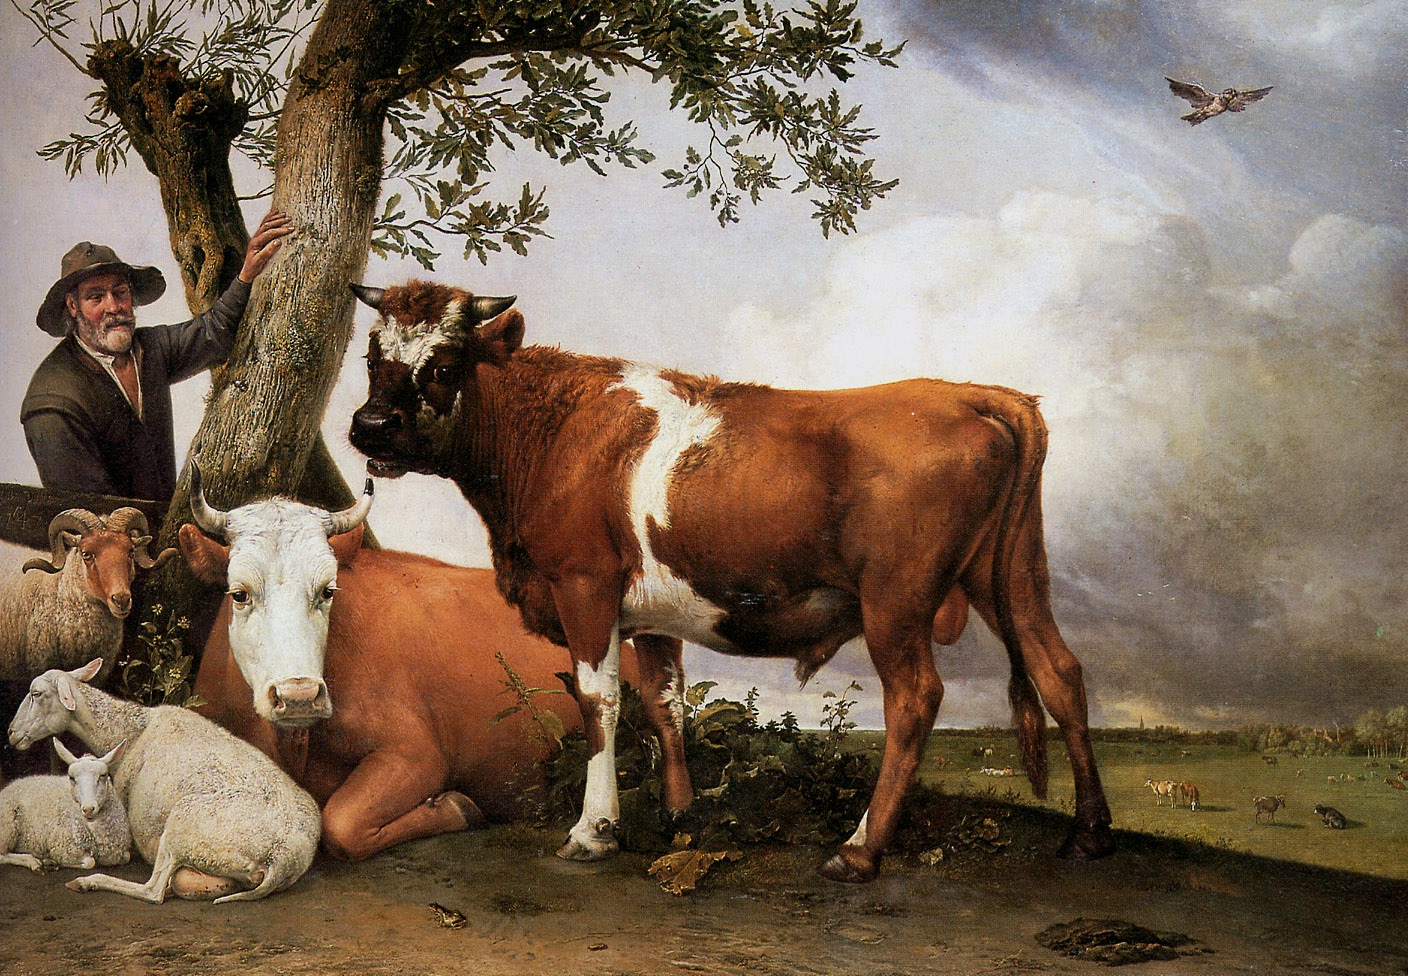 A couple of bulls rest by a tree while a man stands beside them to the left.